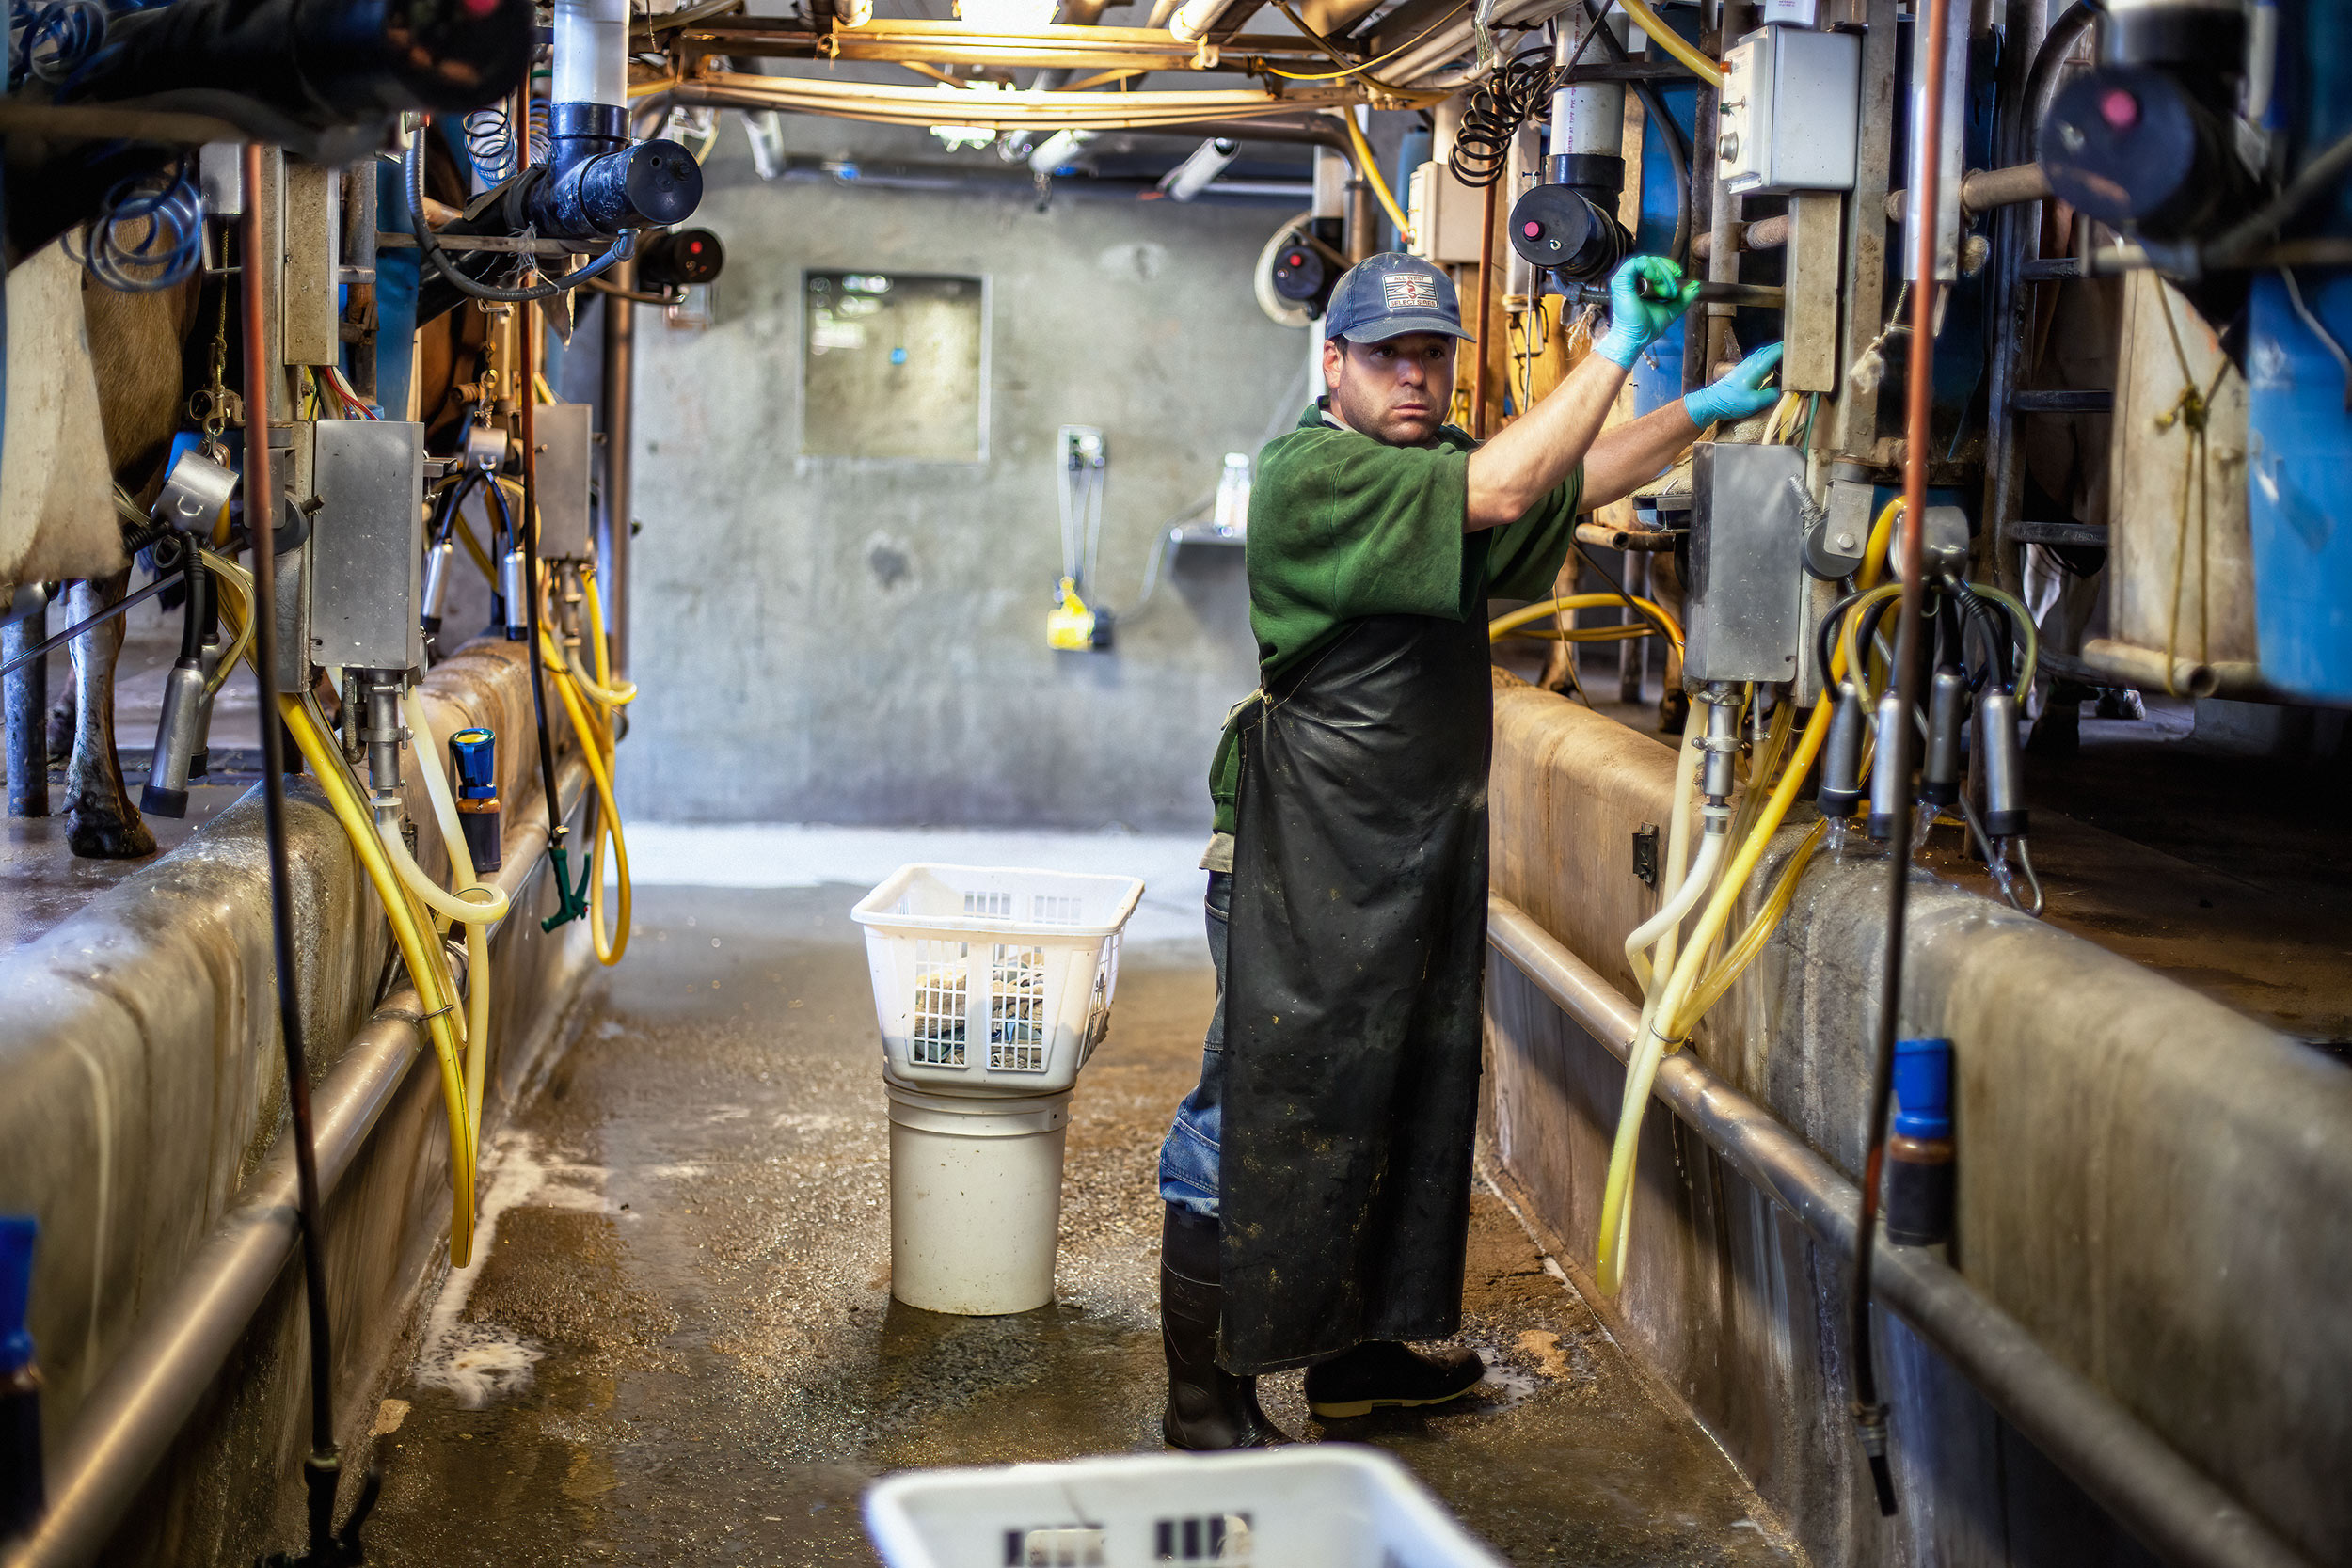 Milking dairy cows with automation. Livestock and agriculture photography